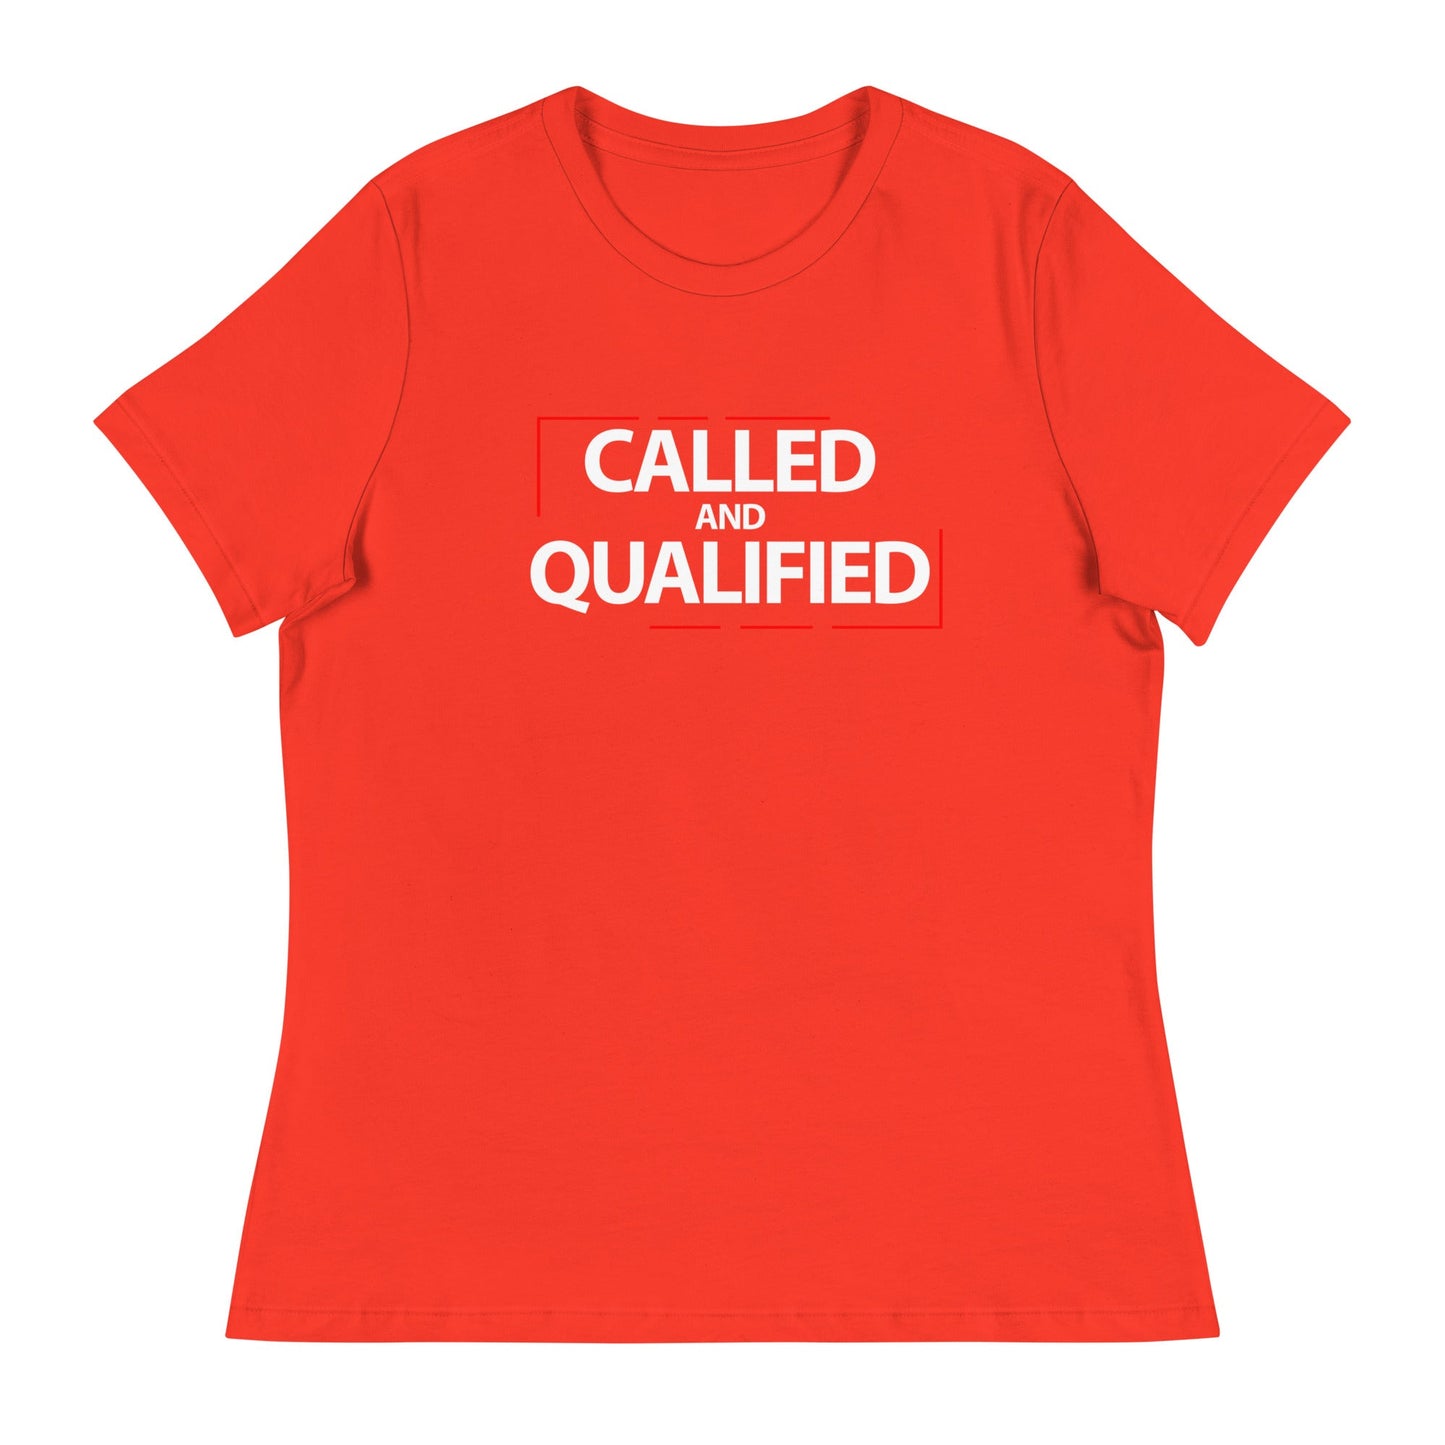 Called & Qualified Women's T-Shirt